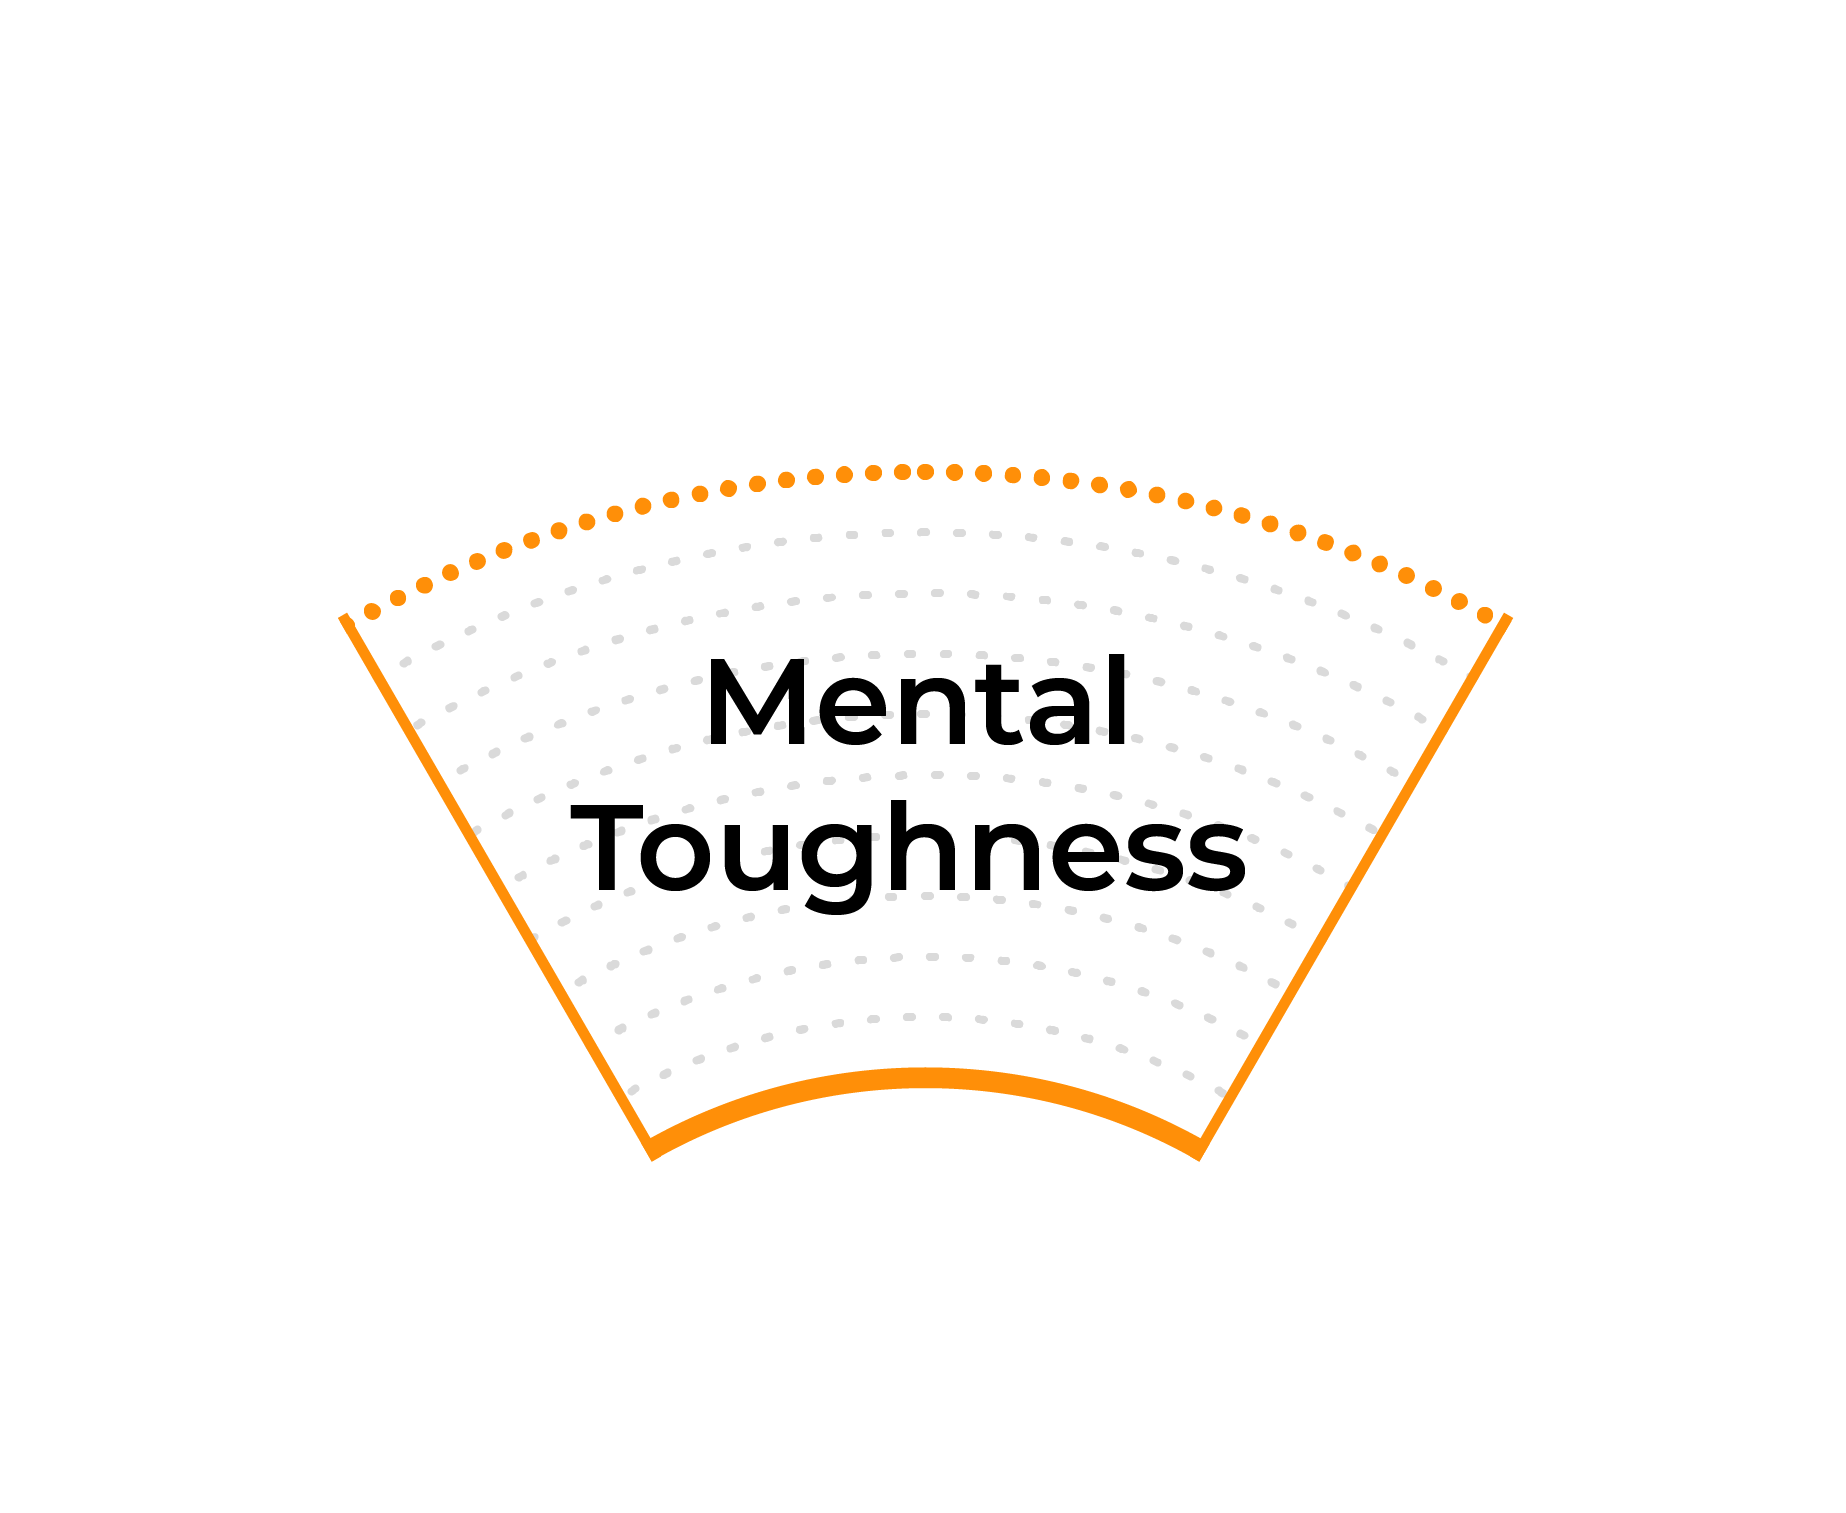 Mental Toughness - Wheel of Business